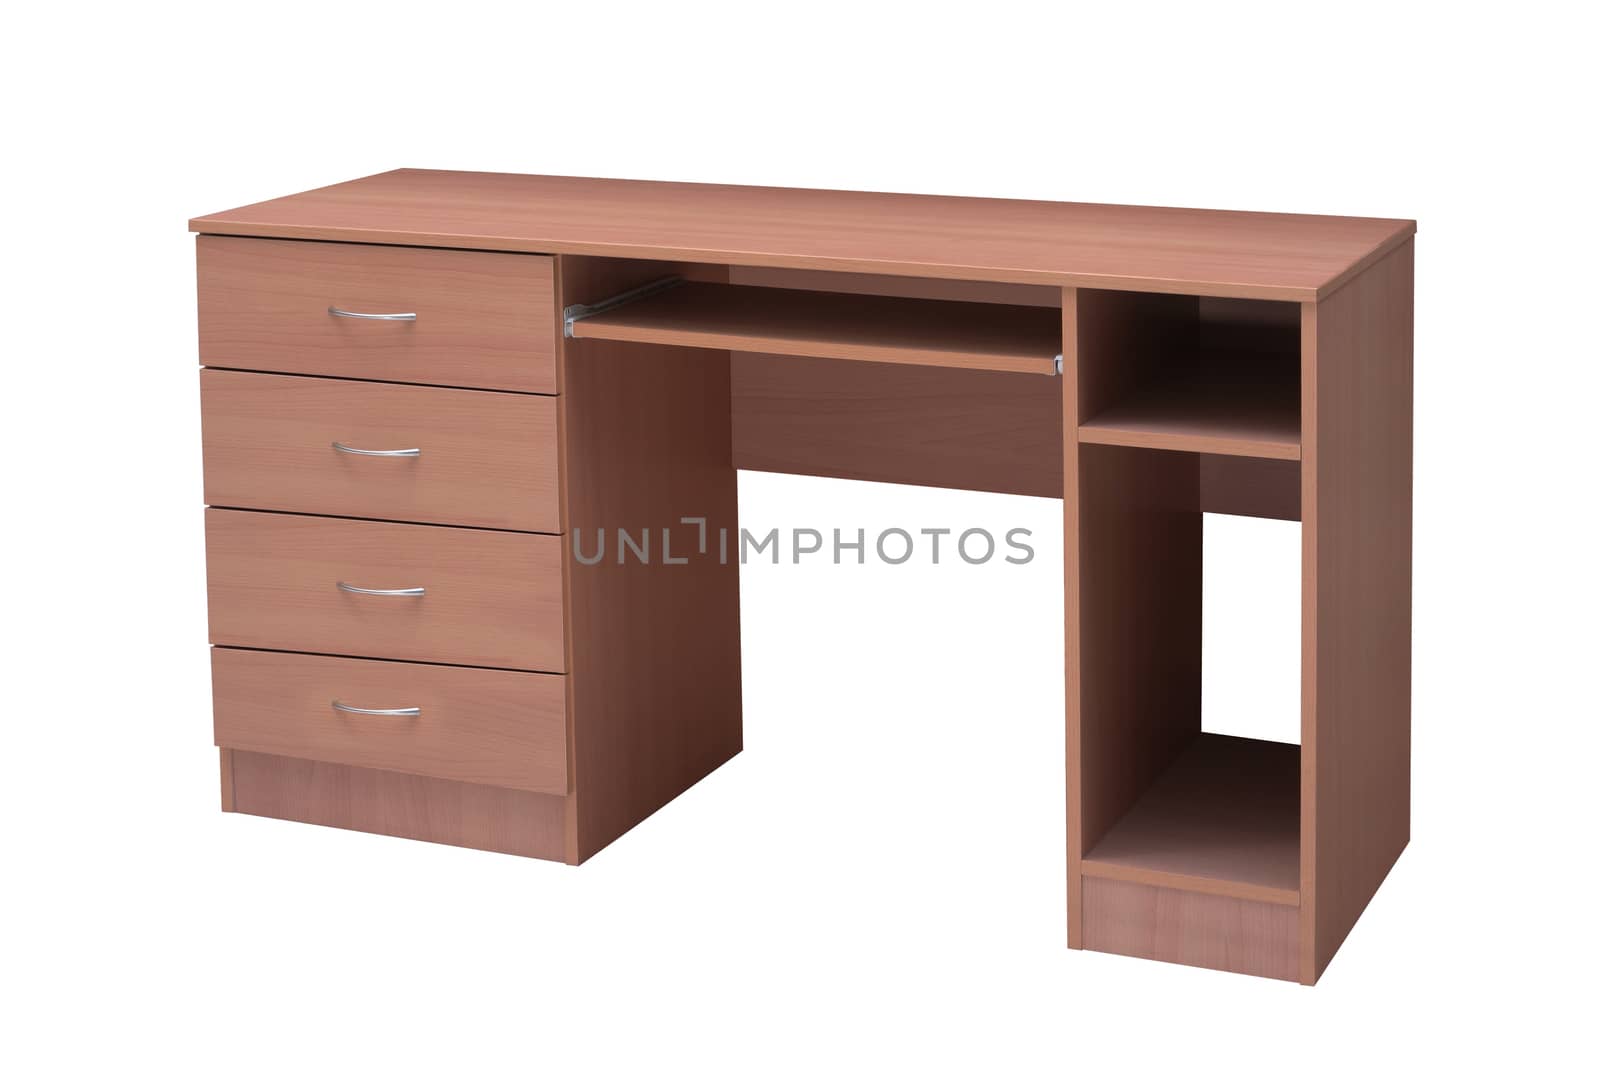 Wooden table on white background.